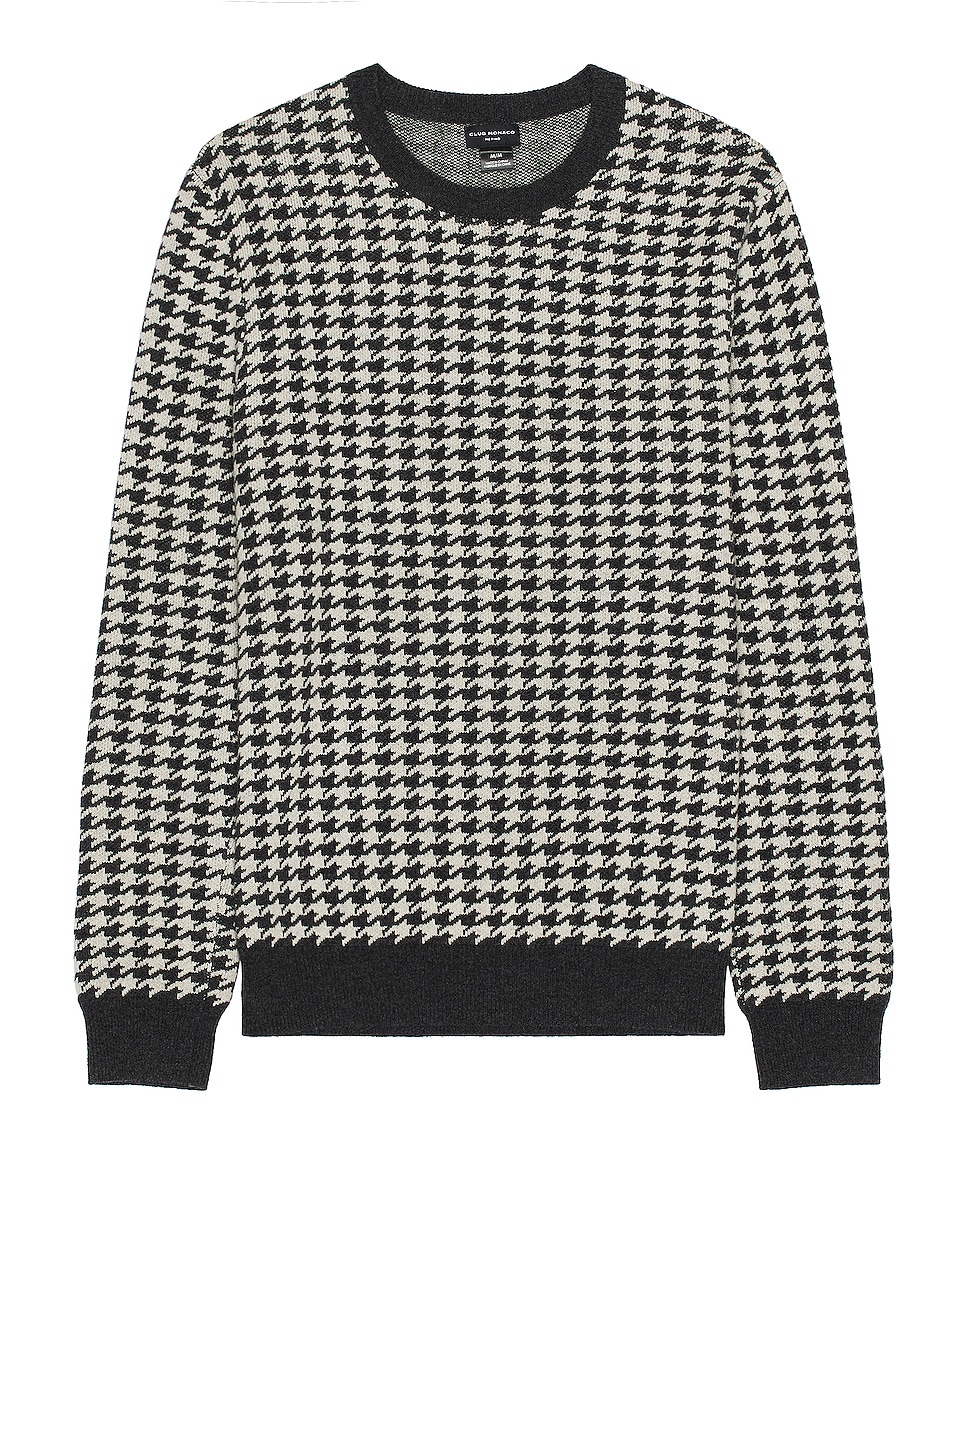 Wool Houndstooth Crew in Charcoal